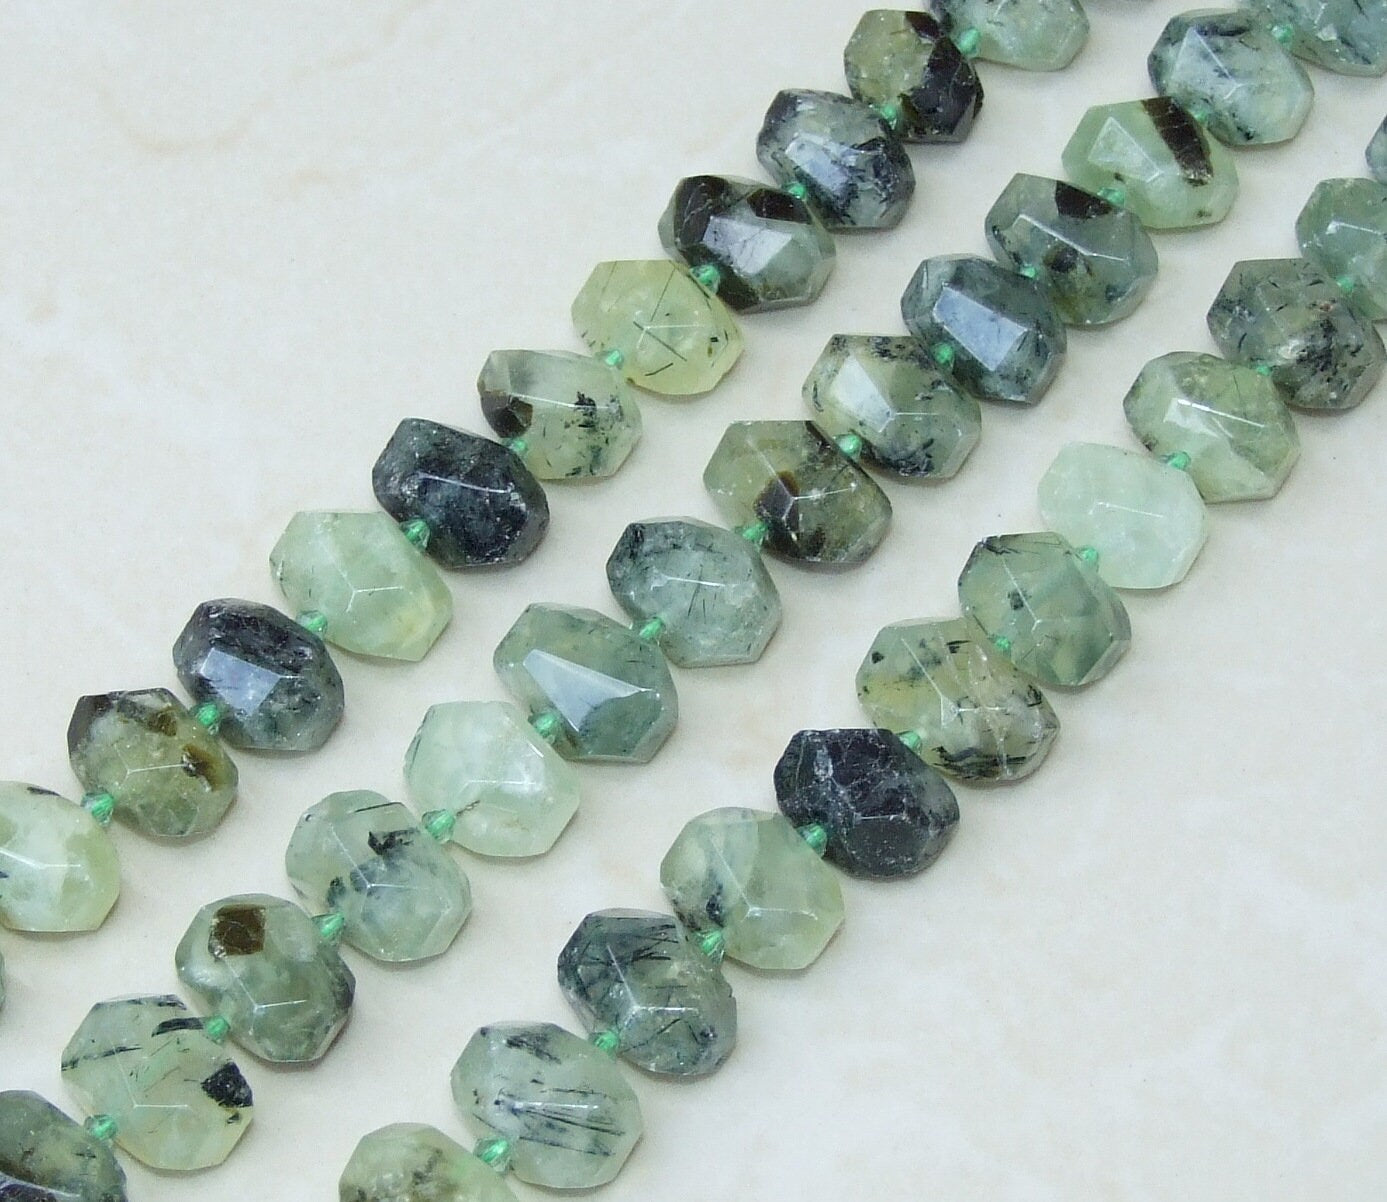 Half Strand Gemstone PREHNITE Faceted NUGGET BEADED Pendant Stress Relief Gifts, 14mm x 14mm x 20mm Jewelry Stones